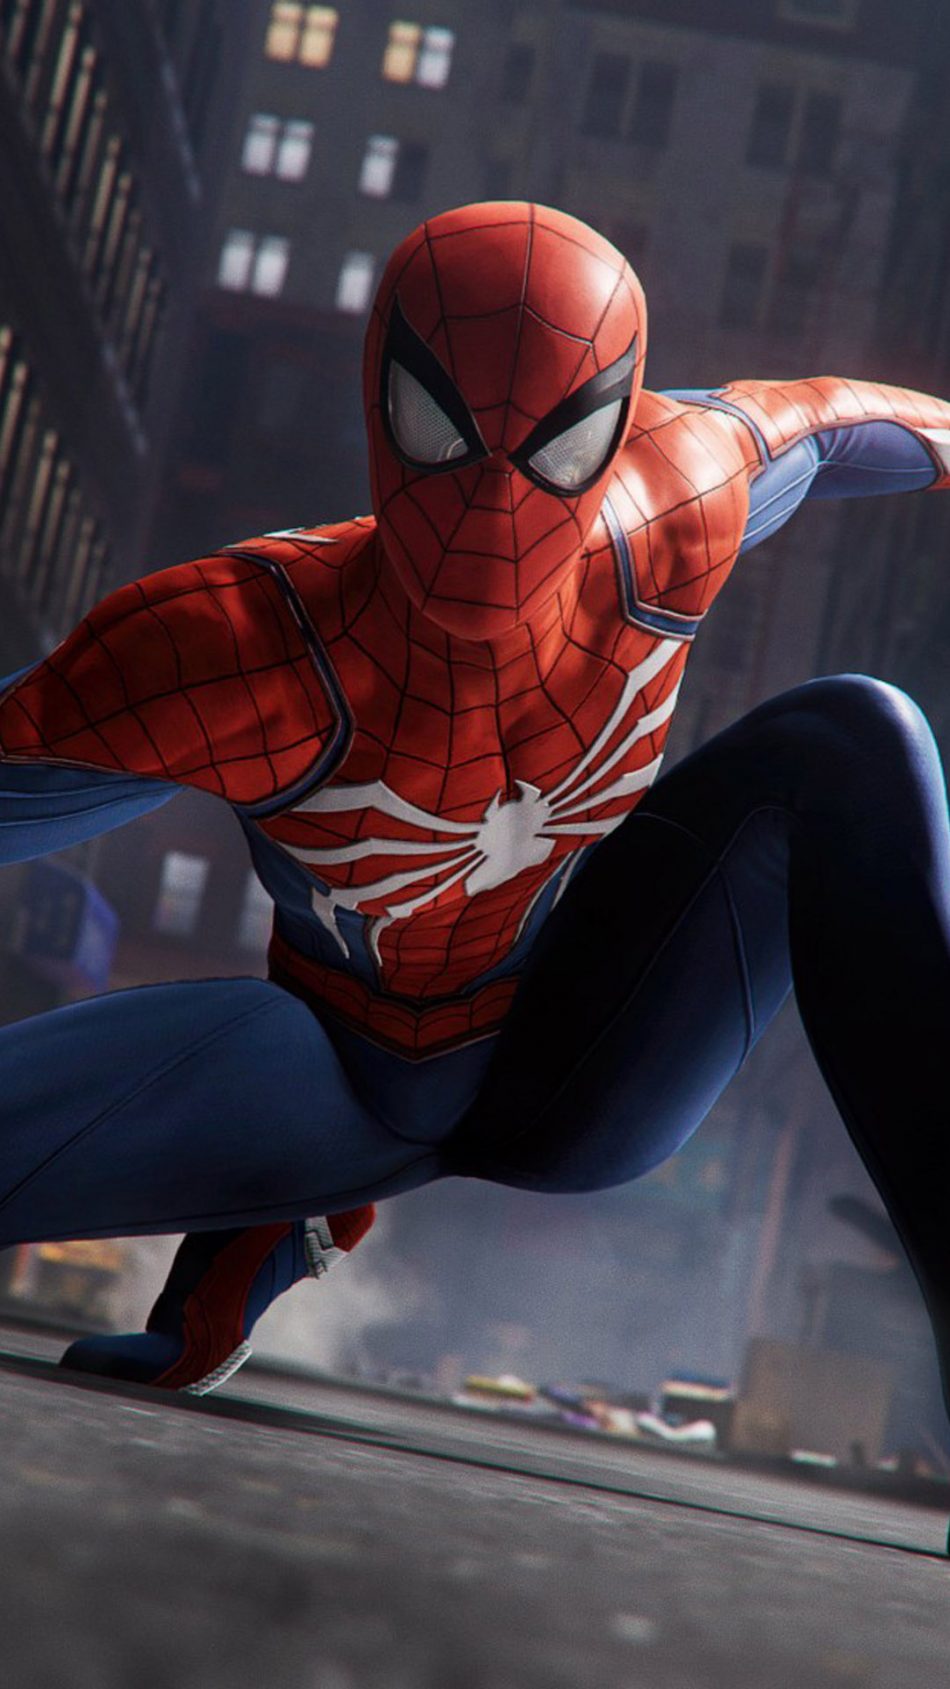 marvel spider man ps4 download for android